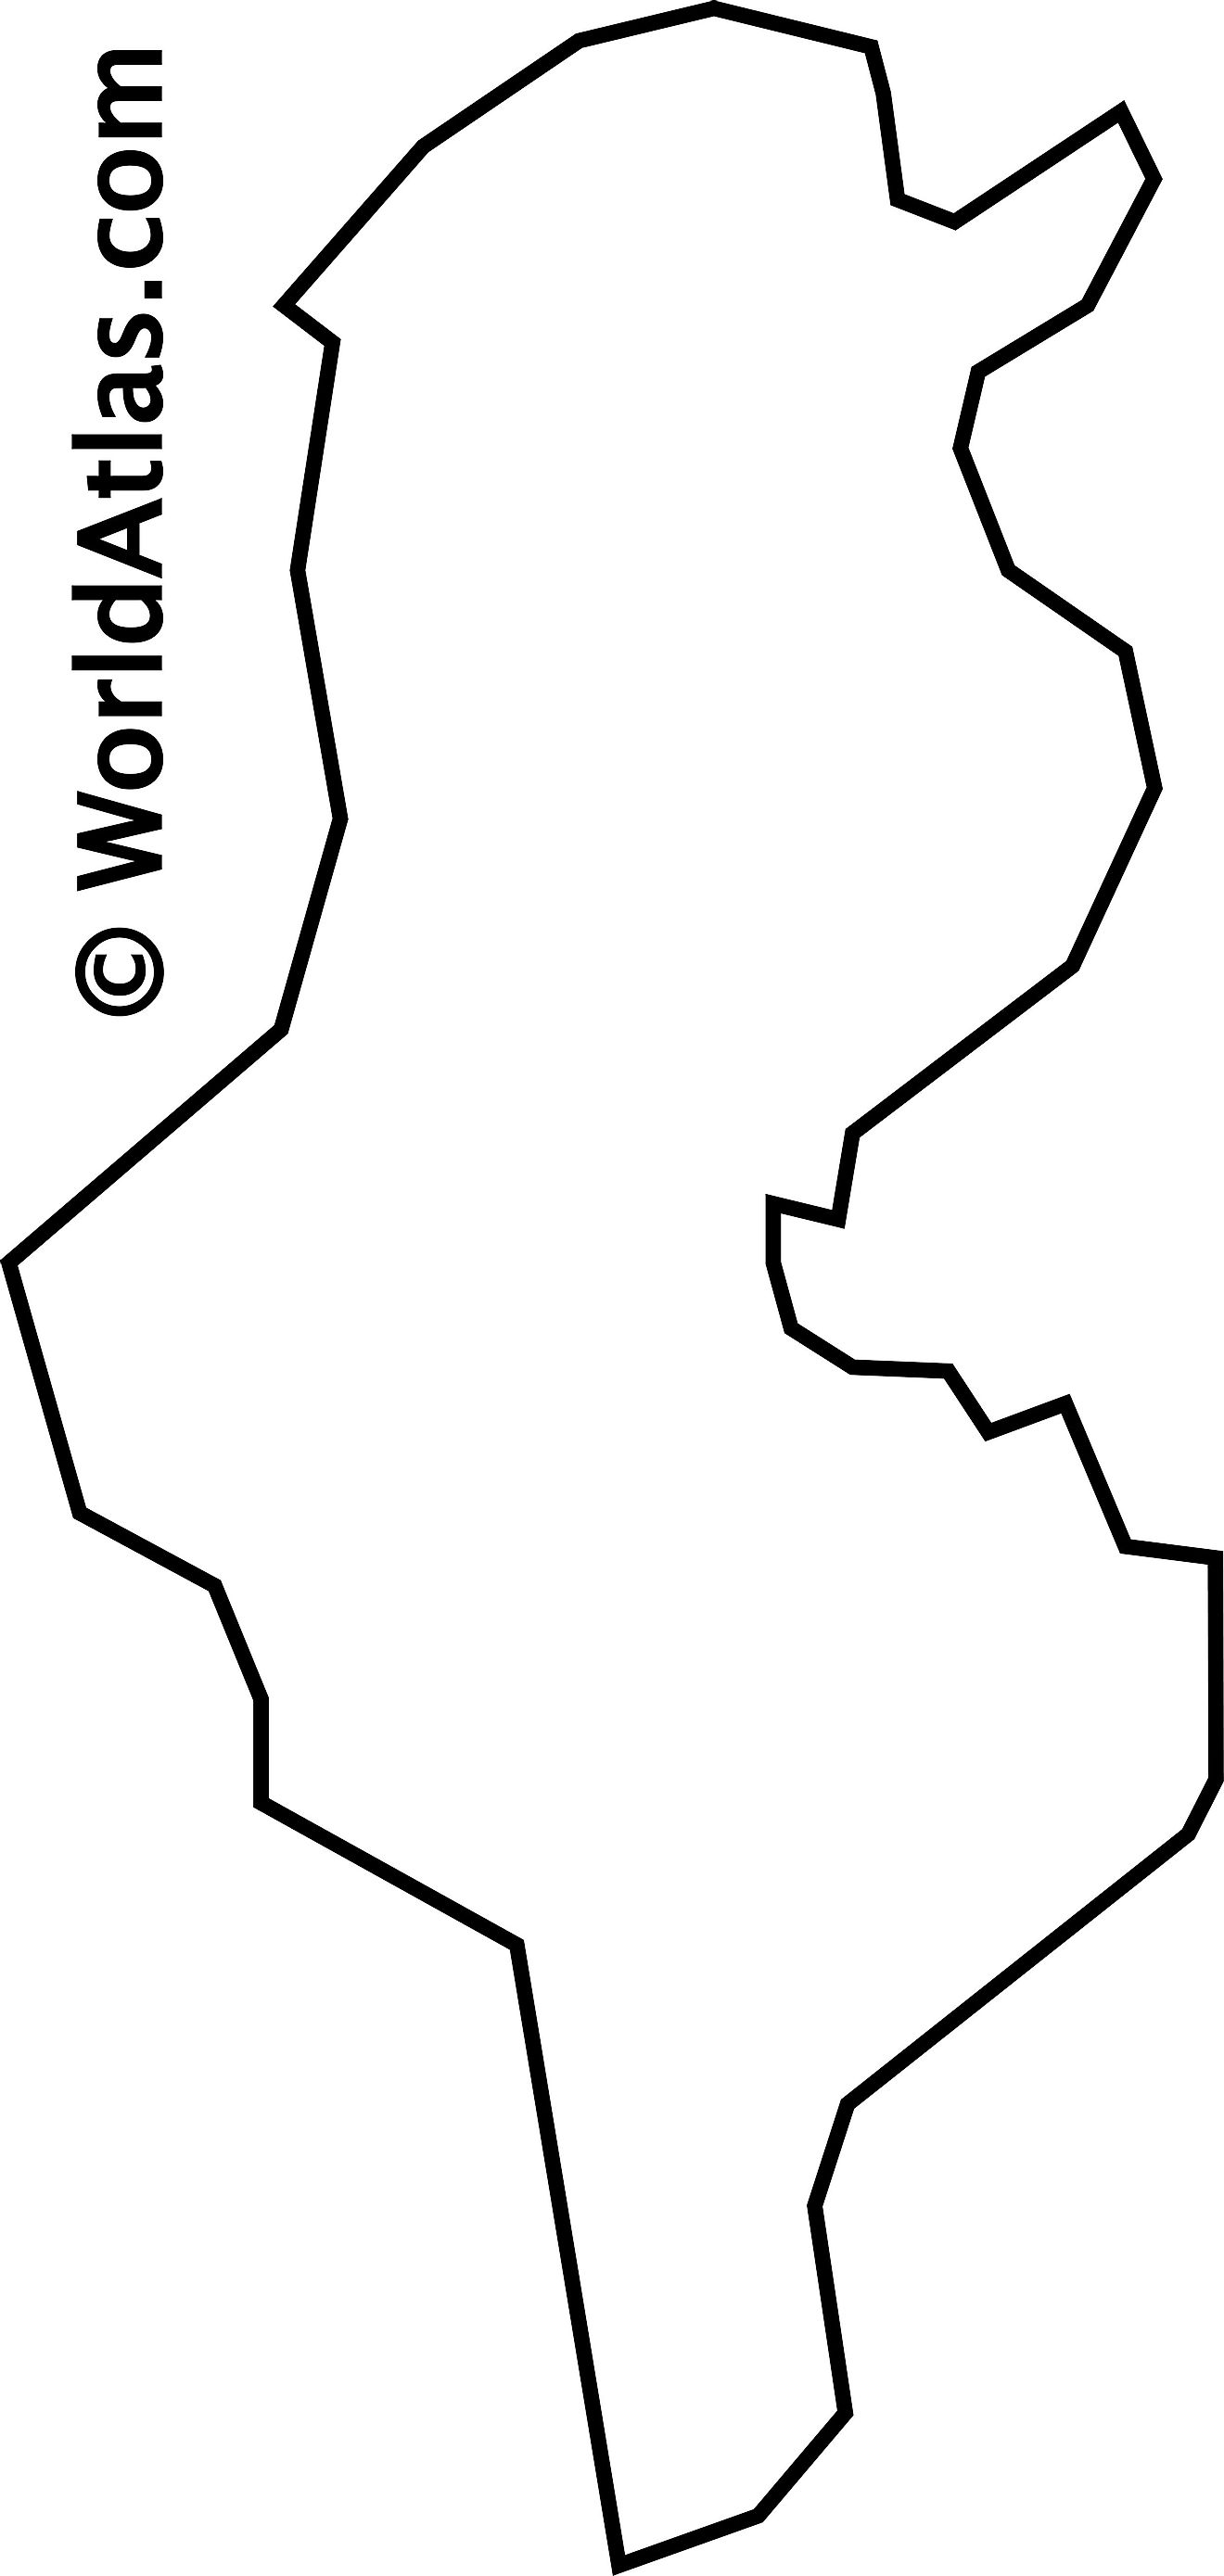 Blank Outline Map of Tunisia